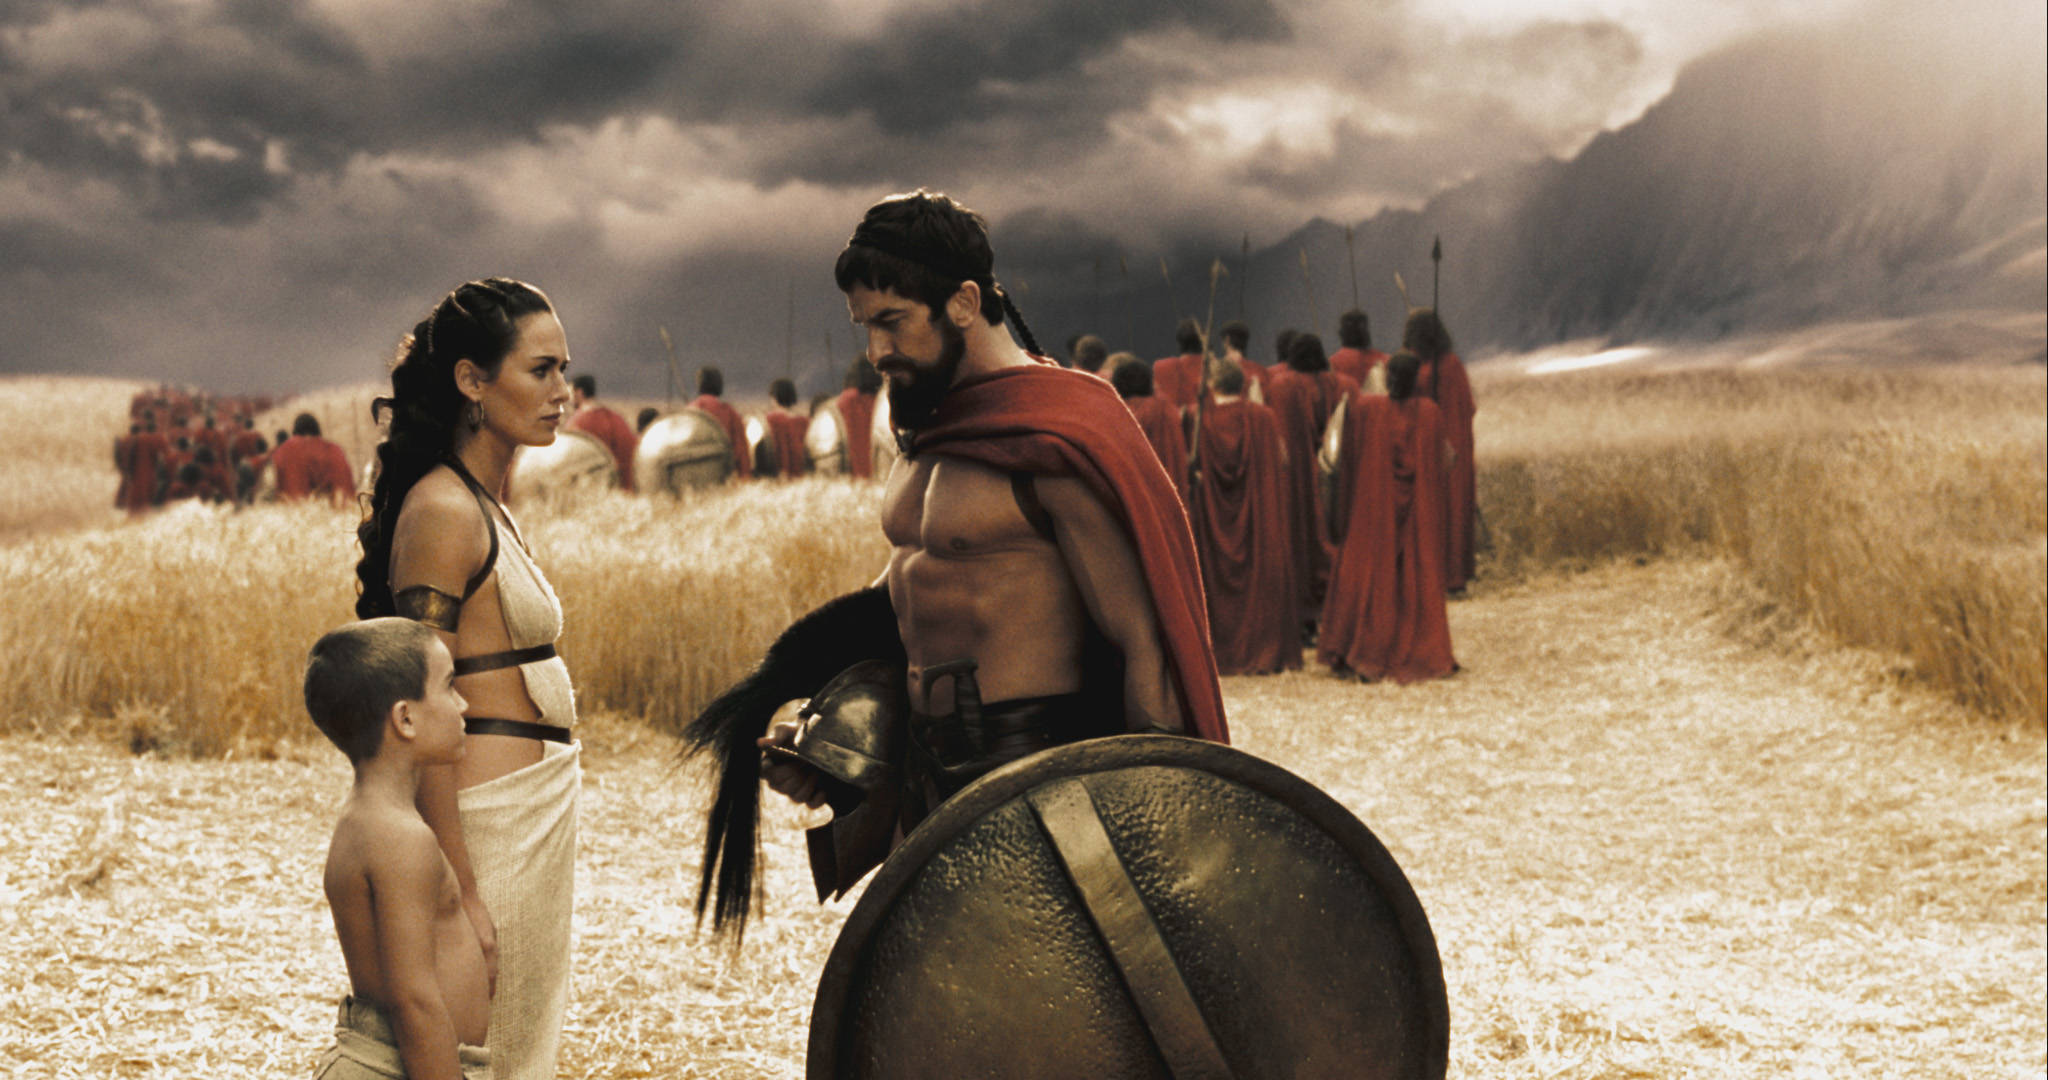 King Leonidas of Sparta and the Legendary Battle of the 300 at Thermopylae